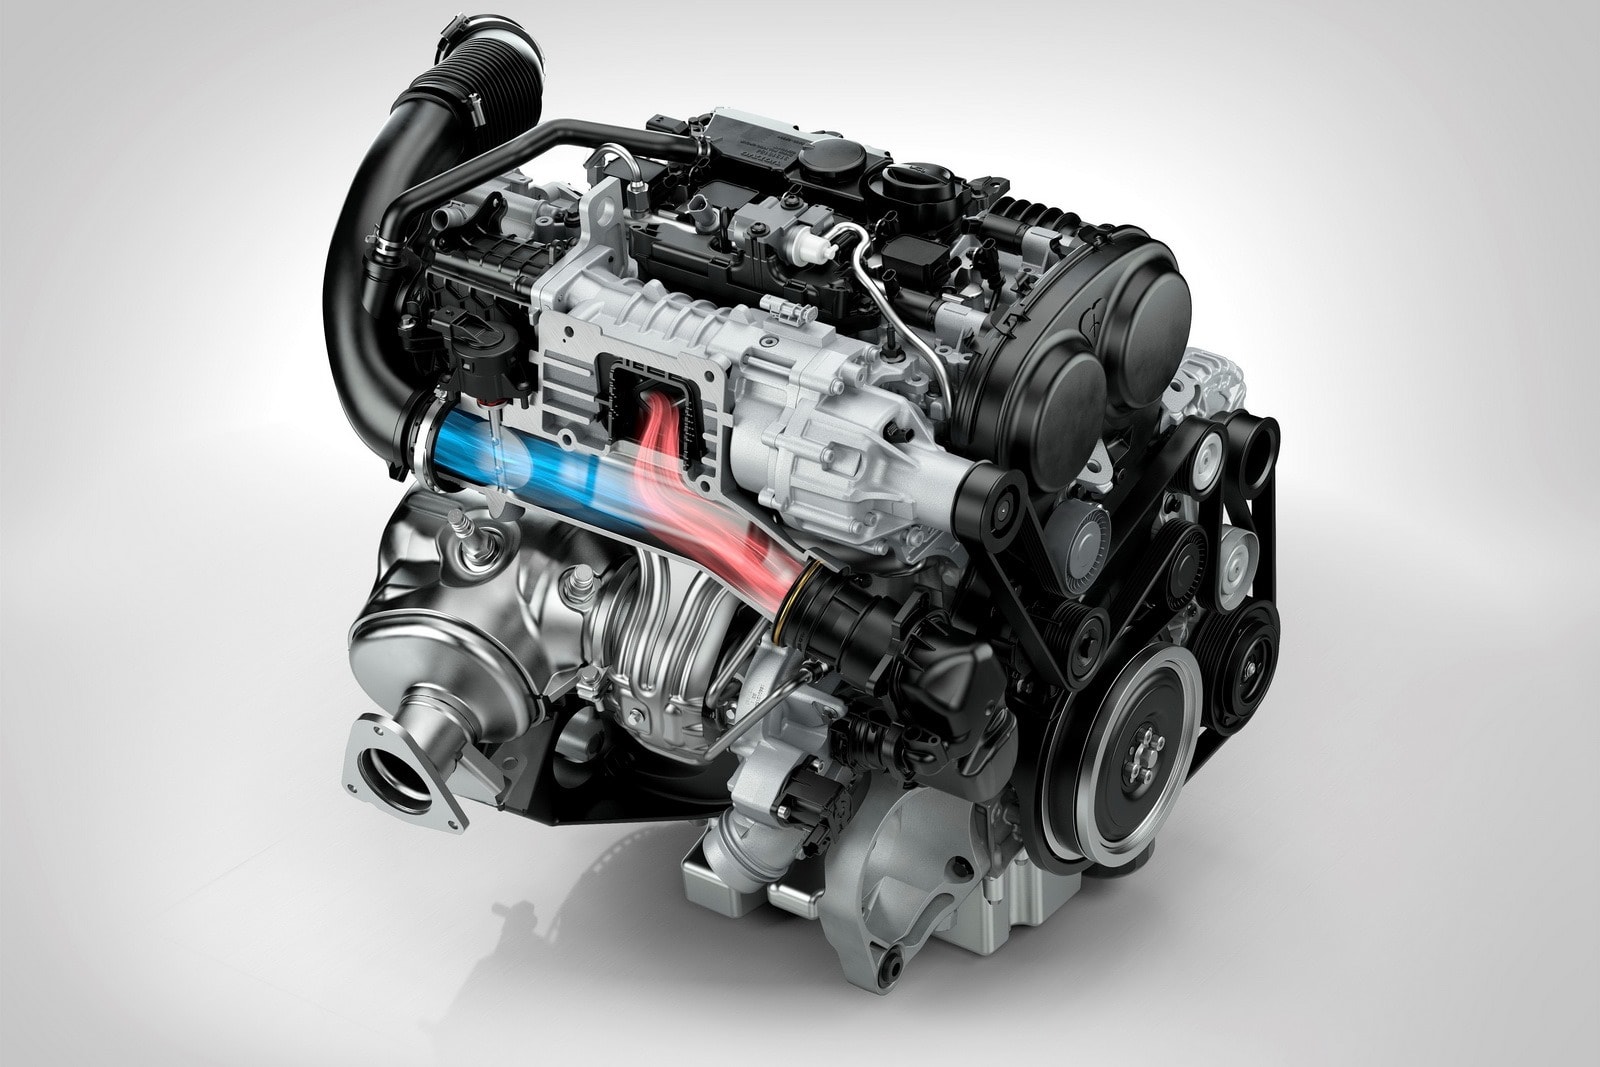 Volvo Announces New Engines Sub100 G/KM D4 and Powerful